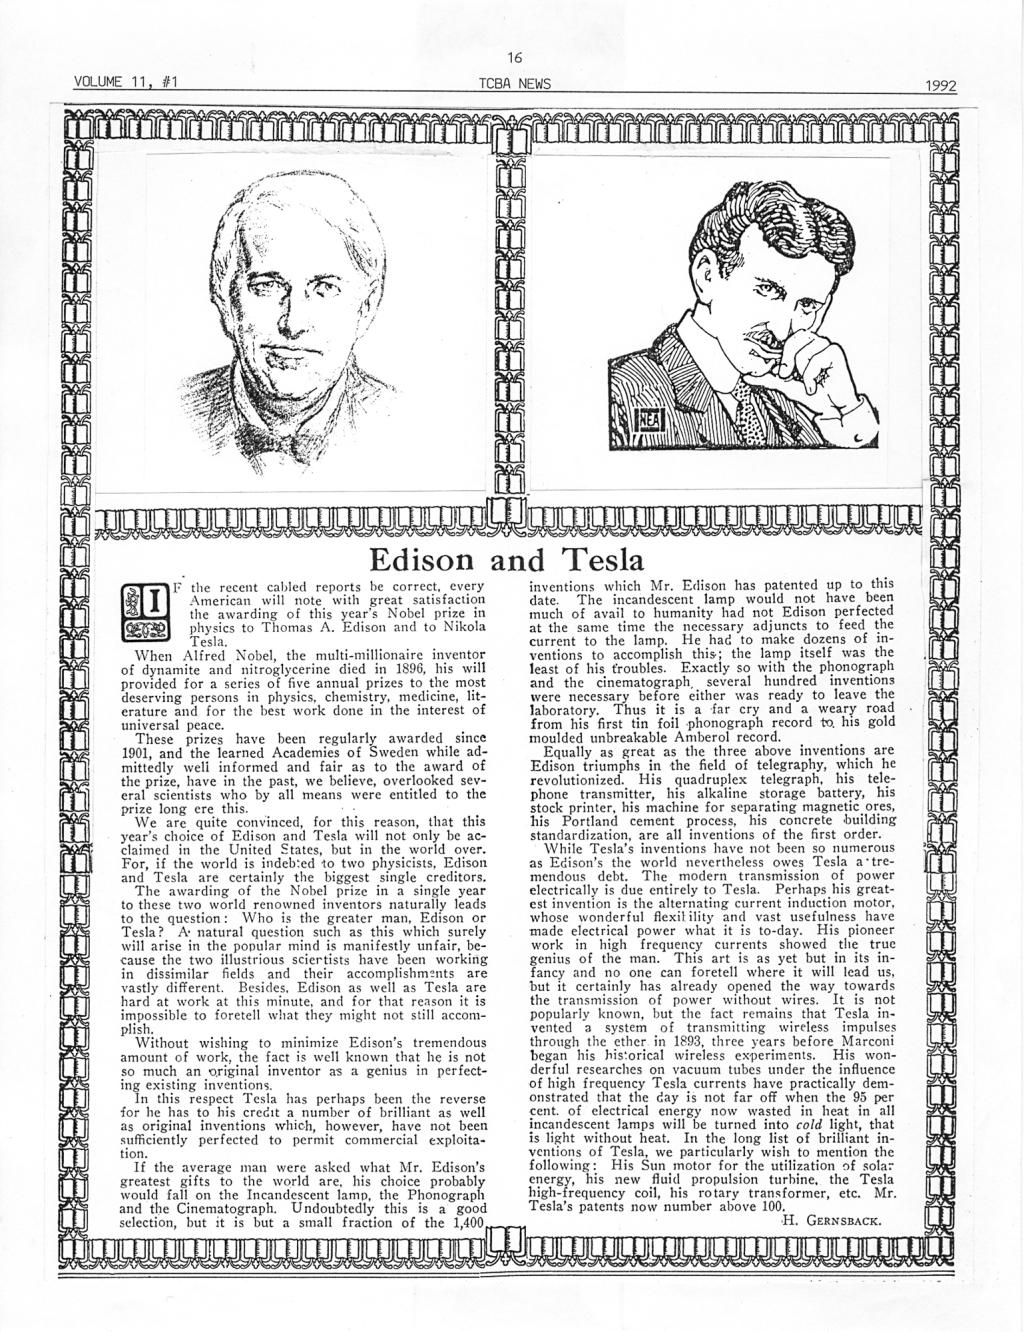 TCBA Volume 11 - Issue 1 - Page 16 of 18